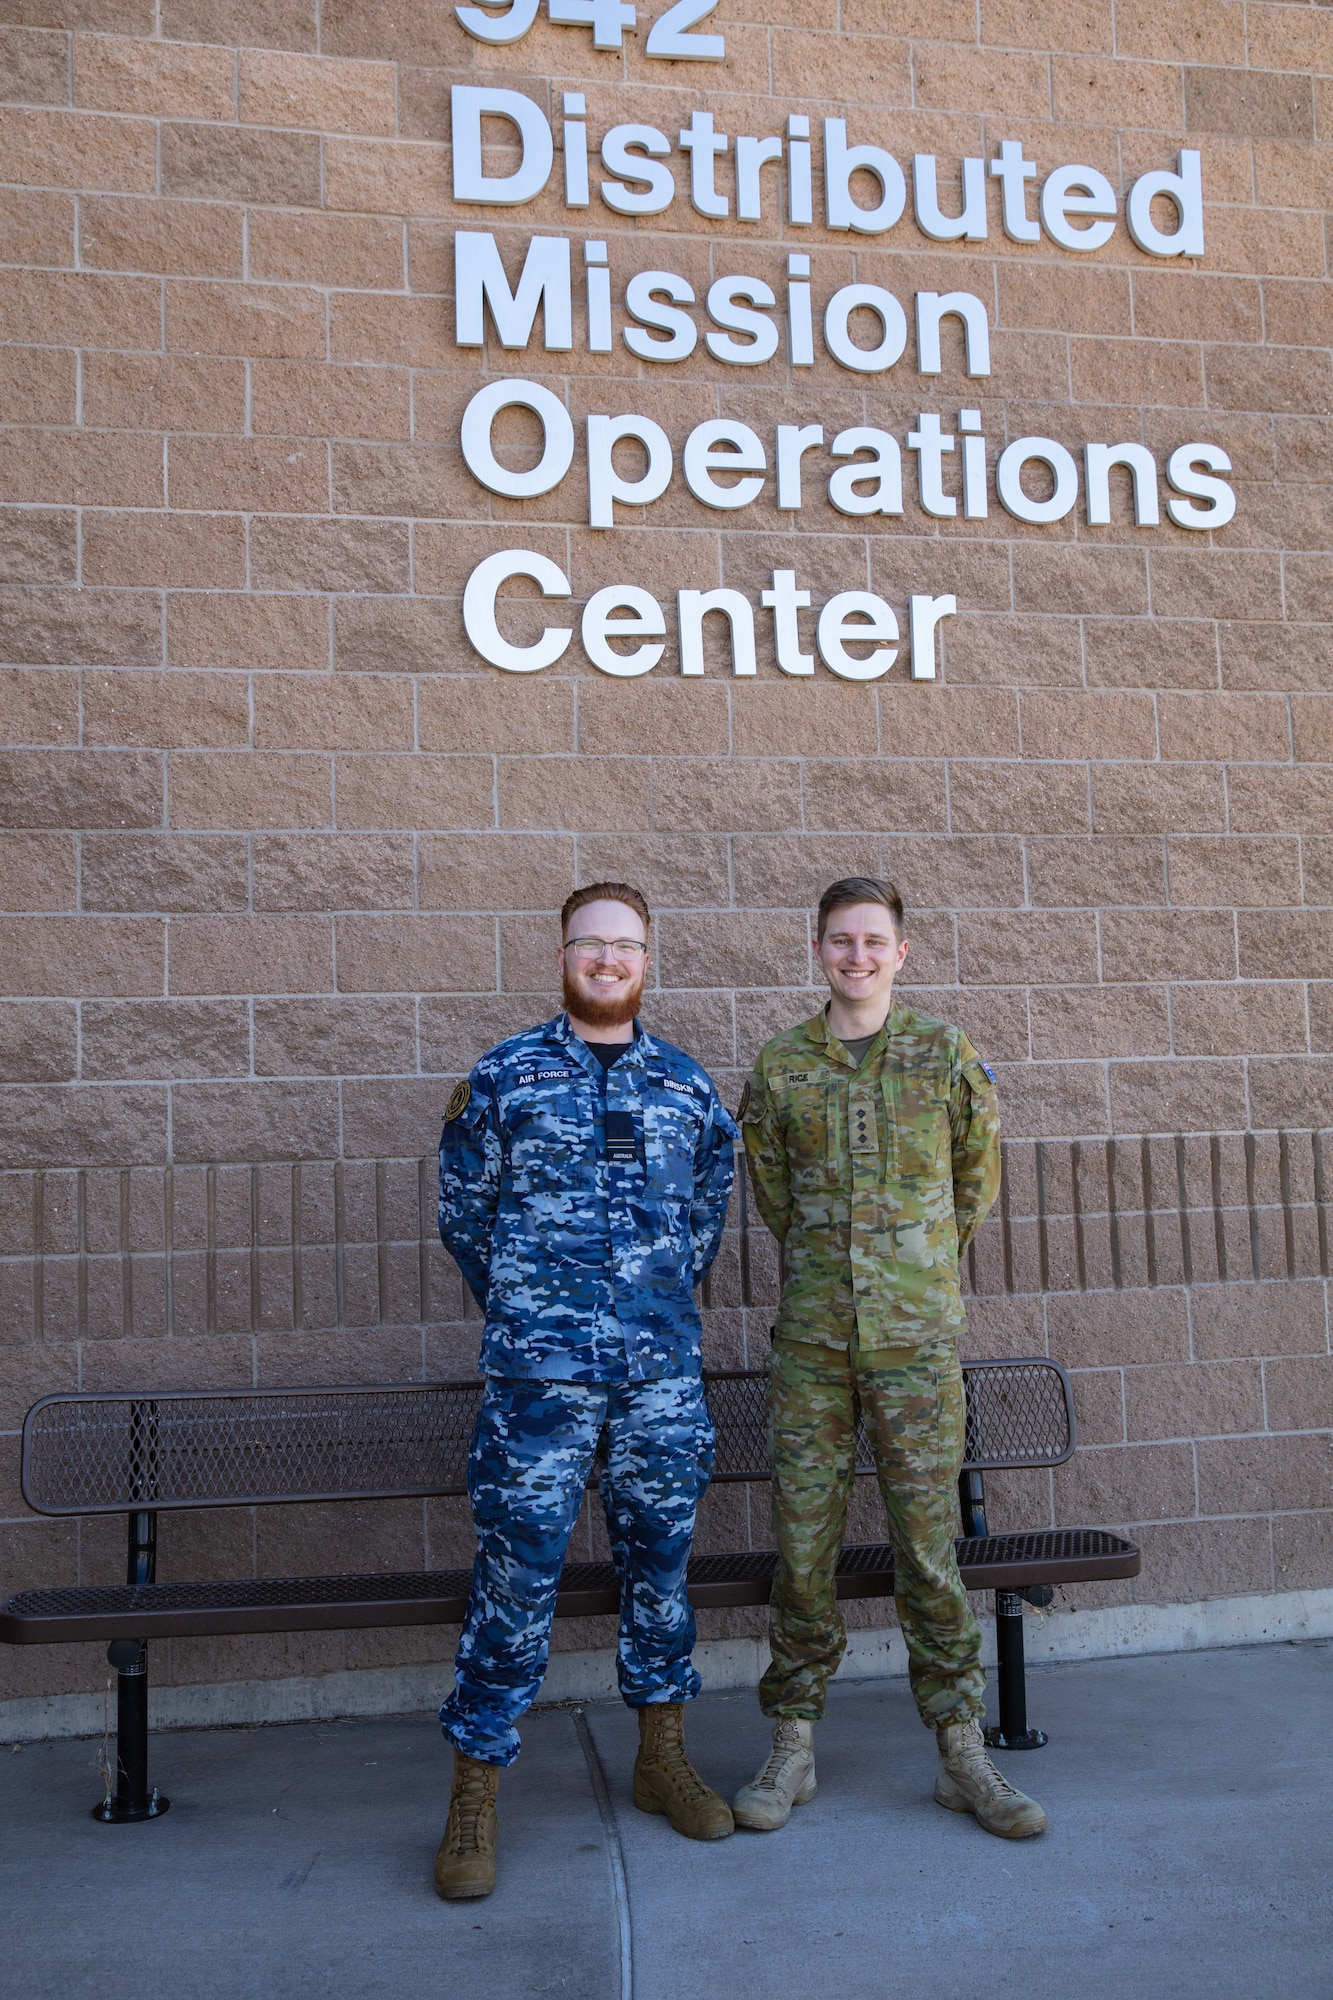 uniformed military members stand in front of brick building with lettering “942 Distributed Mission Operations Center”